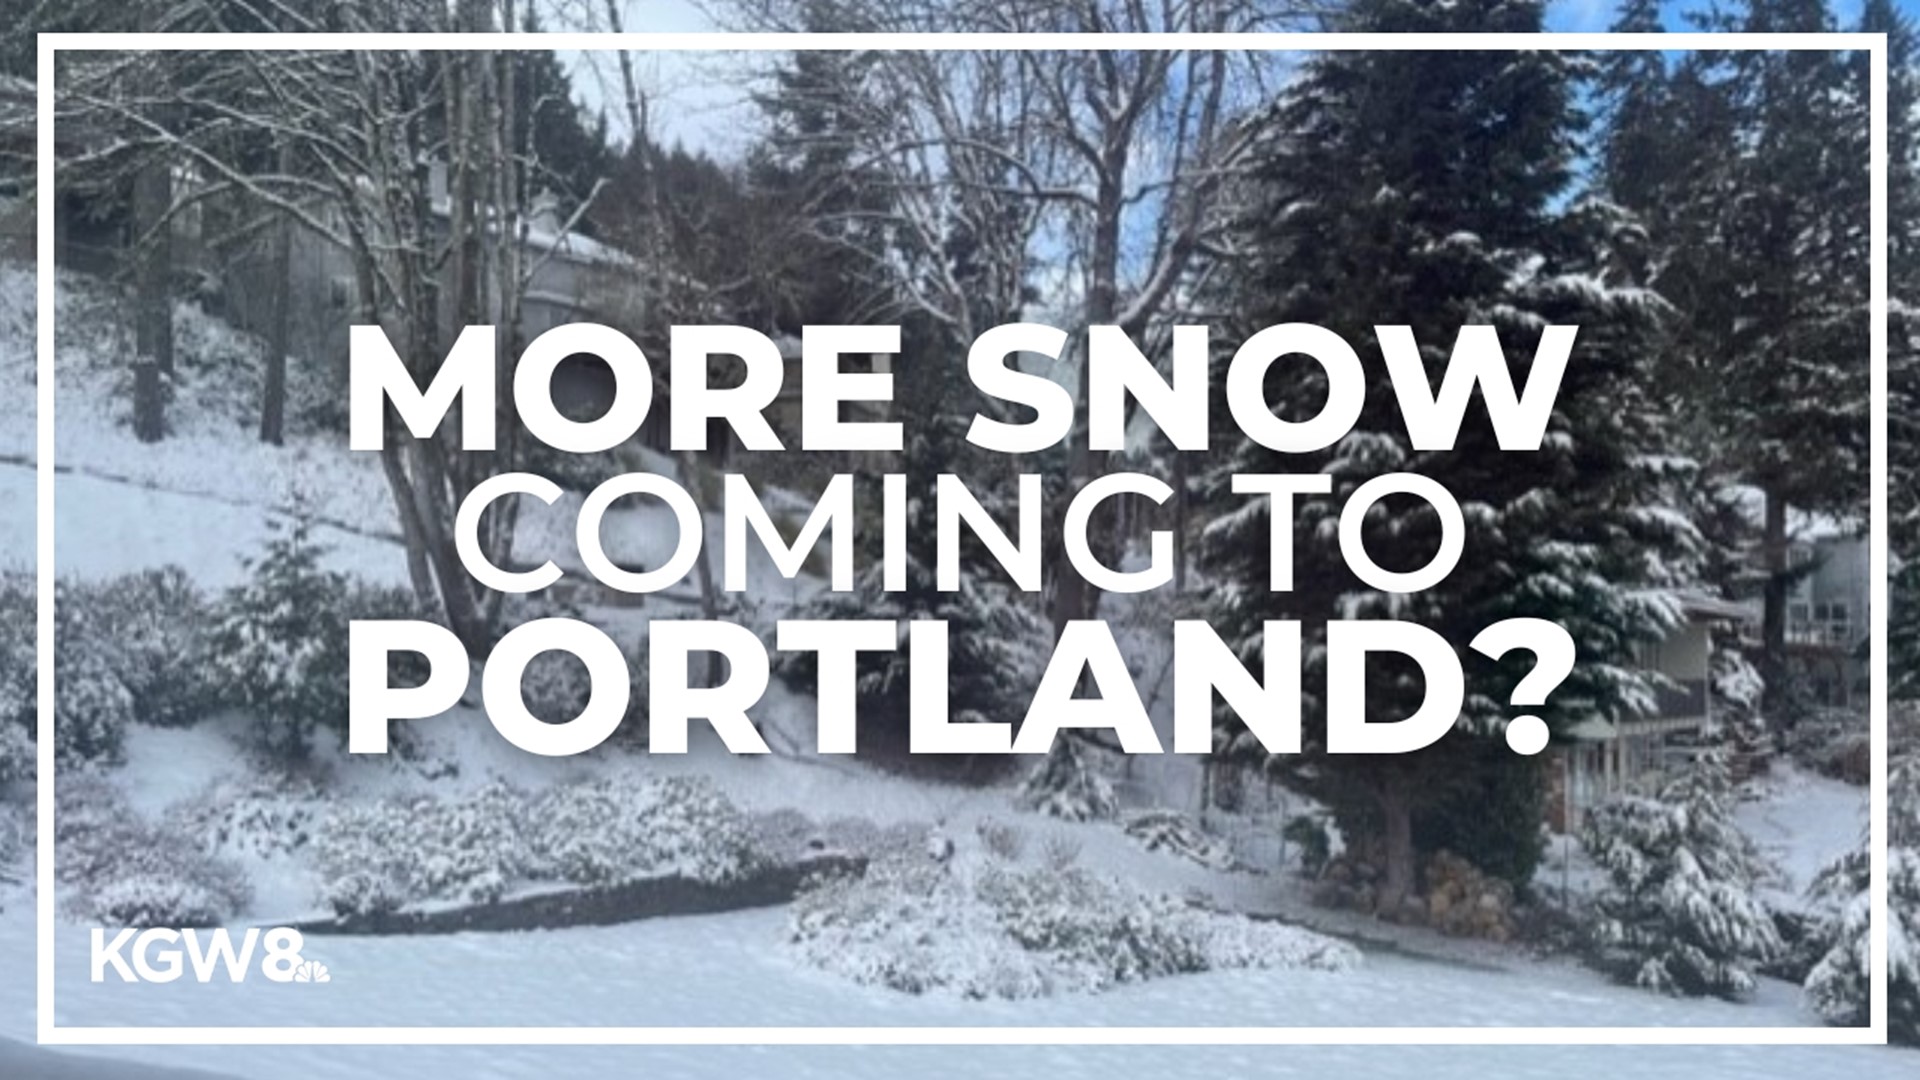 More snow may be on the way this weekend and early next week. KGW meteorologist Rod Hill has the KGW+ weather report for Friday, Feb. 24, 2023.